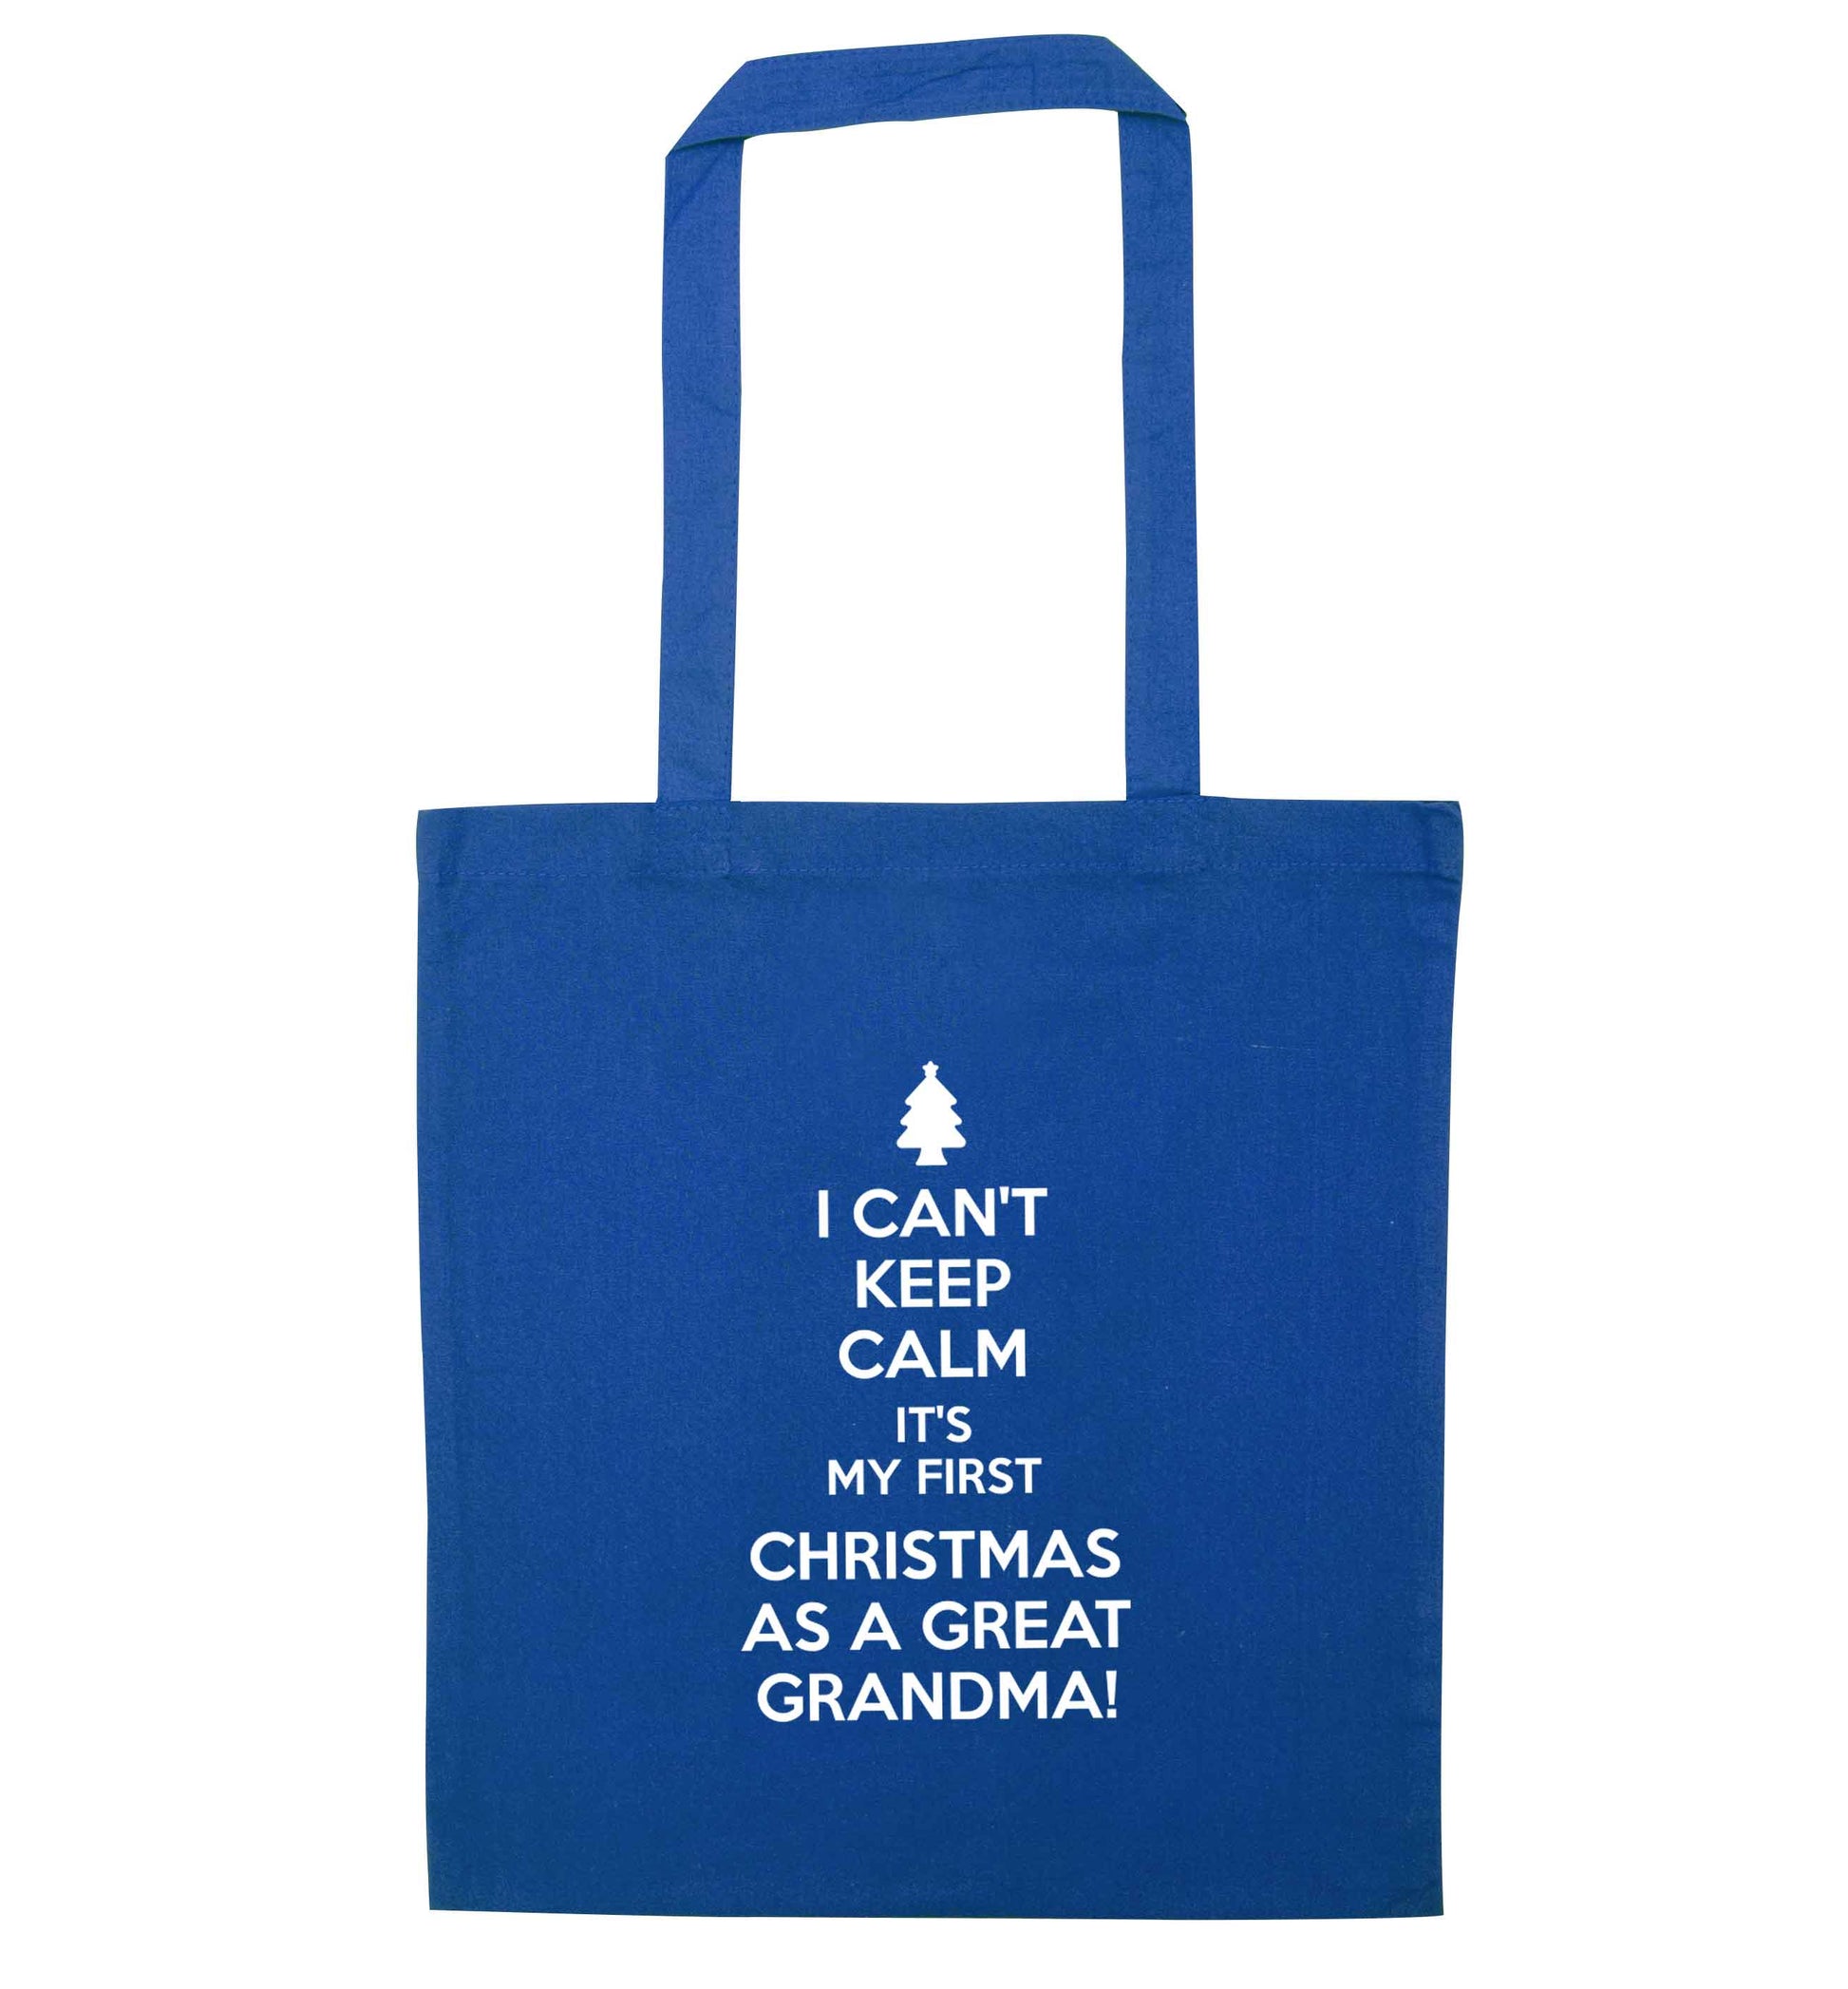 I can't keep calm it's my first Christmas as a great grandma! blue tote bag